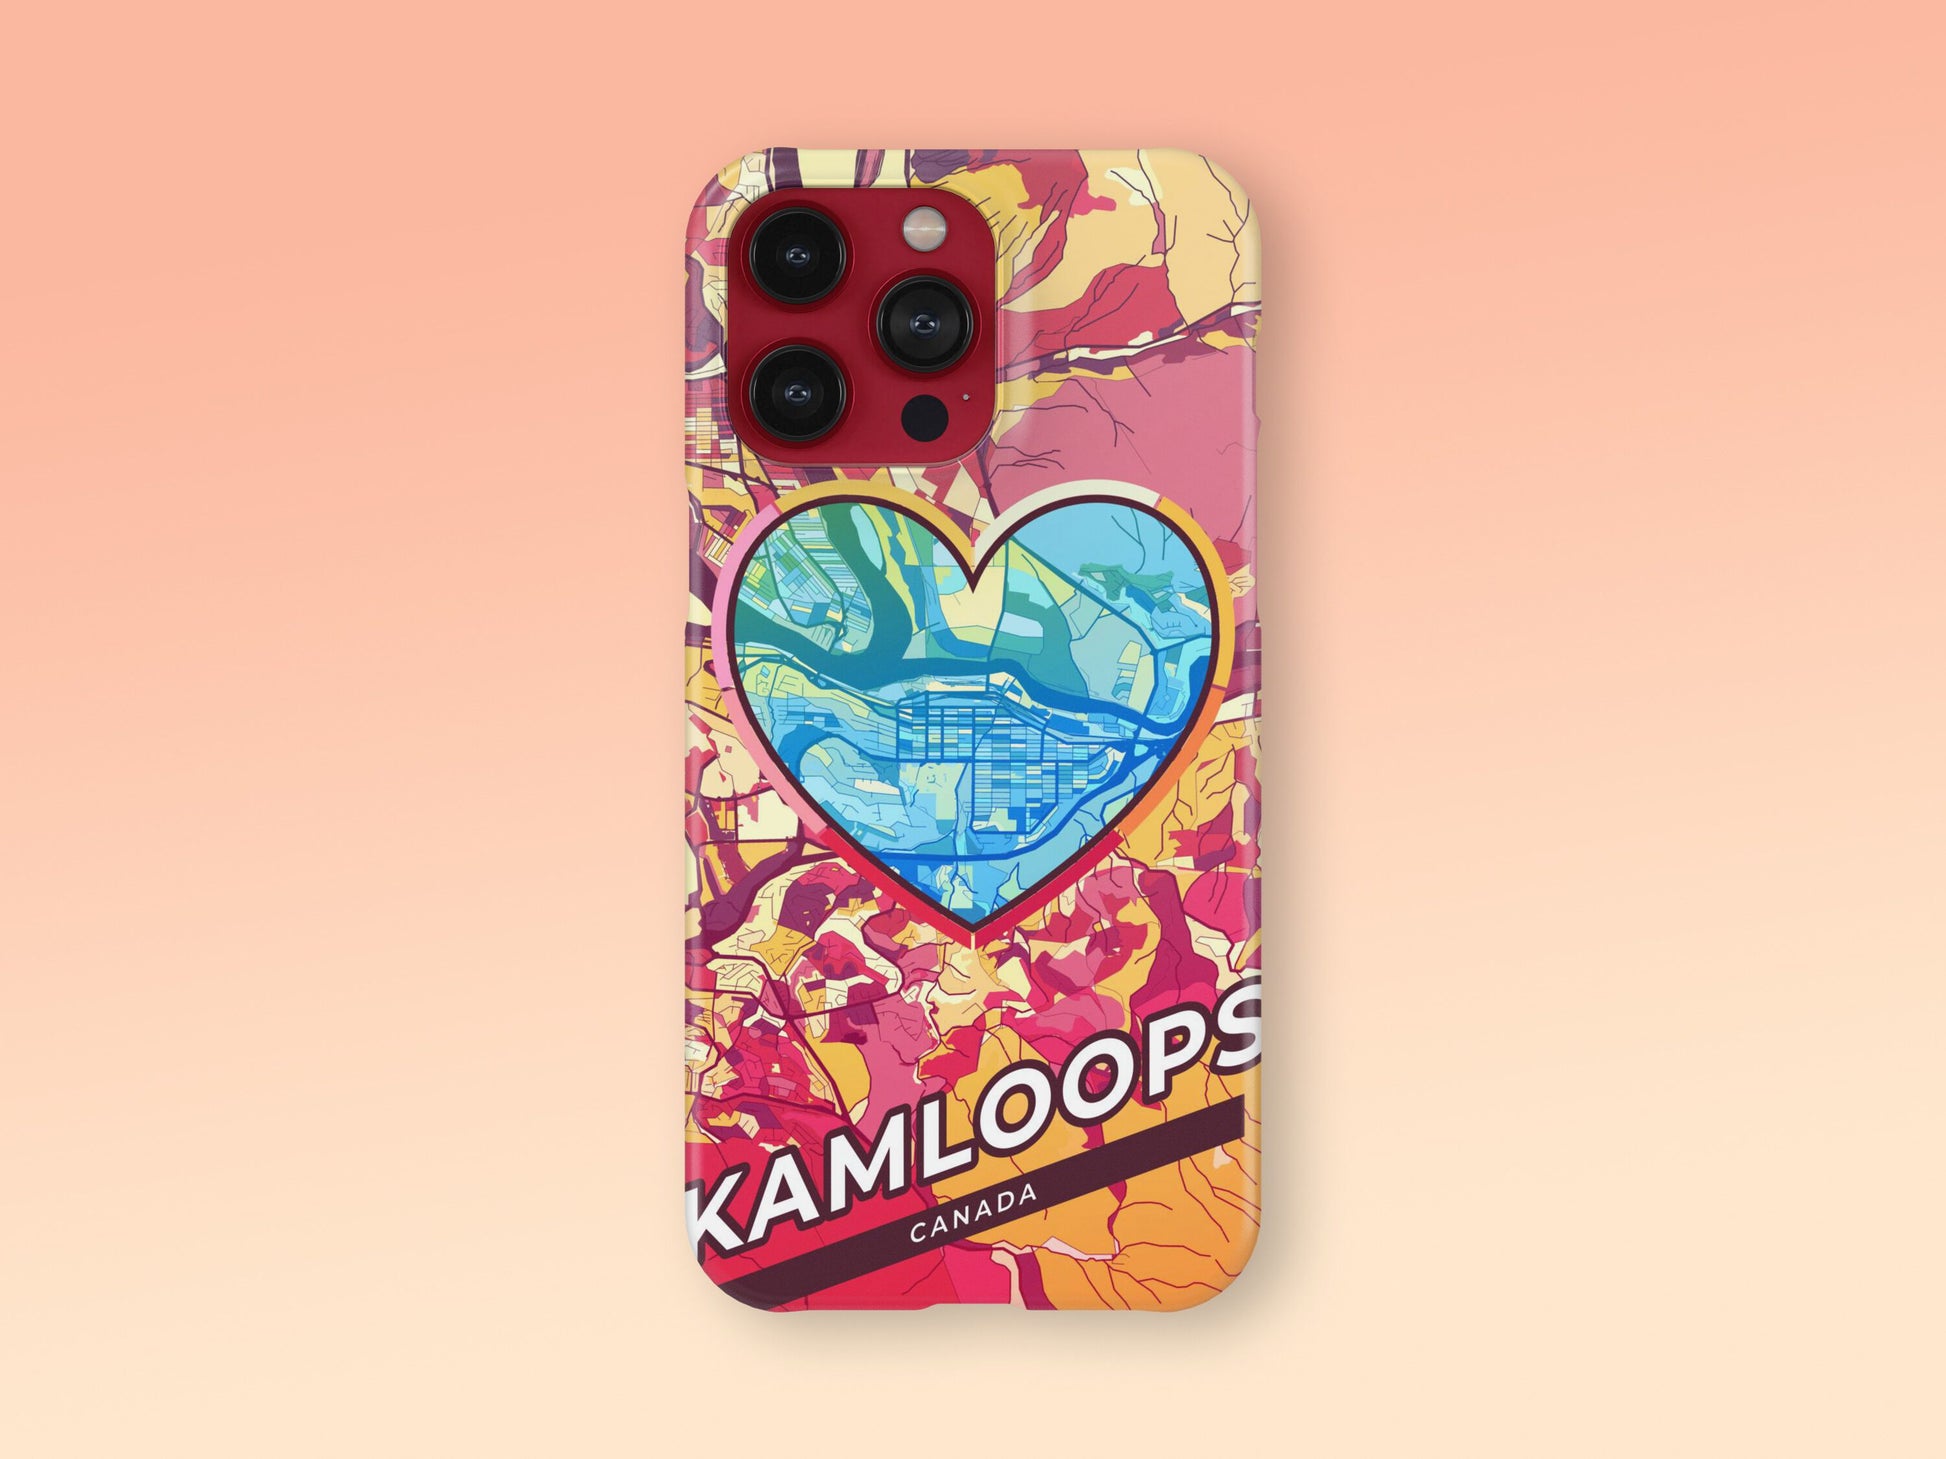 Kamloops Canada slim phone case with colorful icon. Birthday, wedding or housewarming gift. Couple match cases. 2